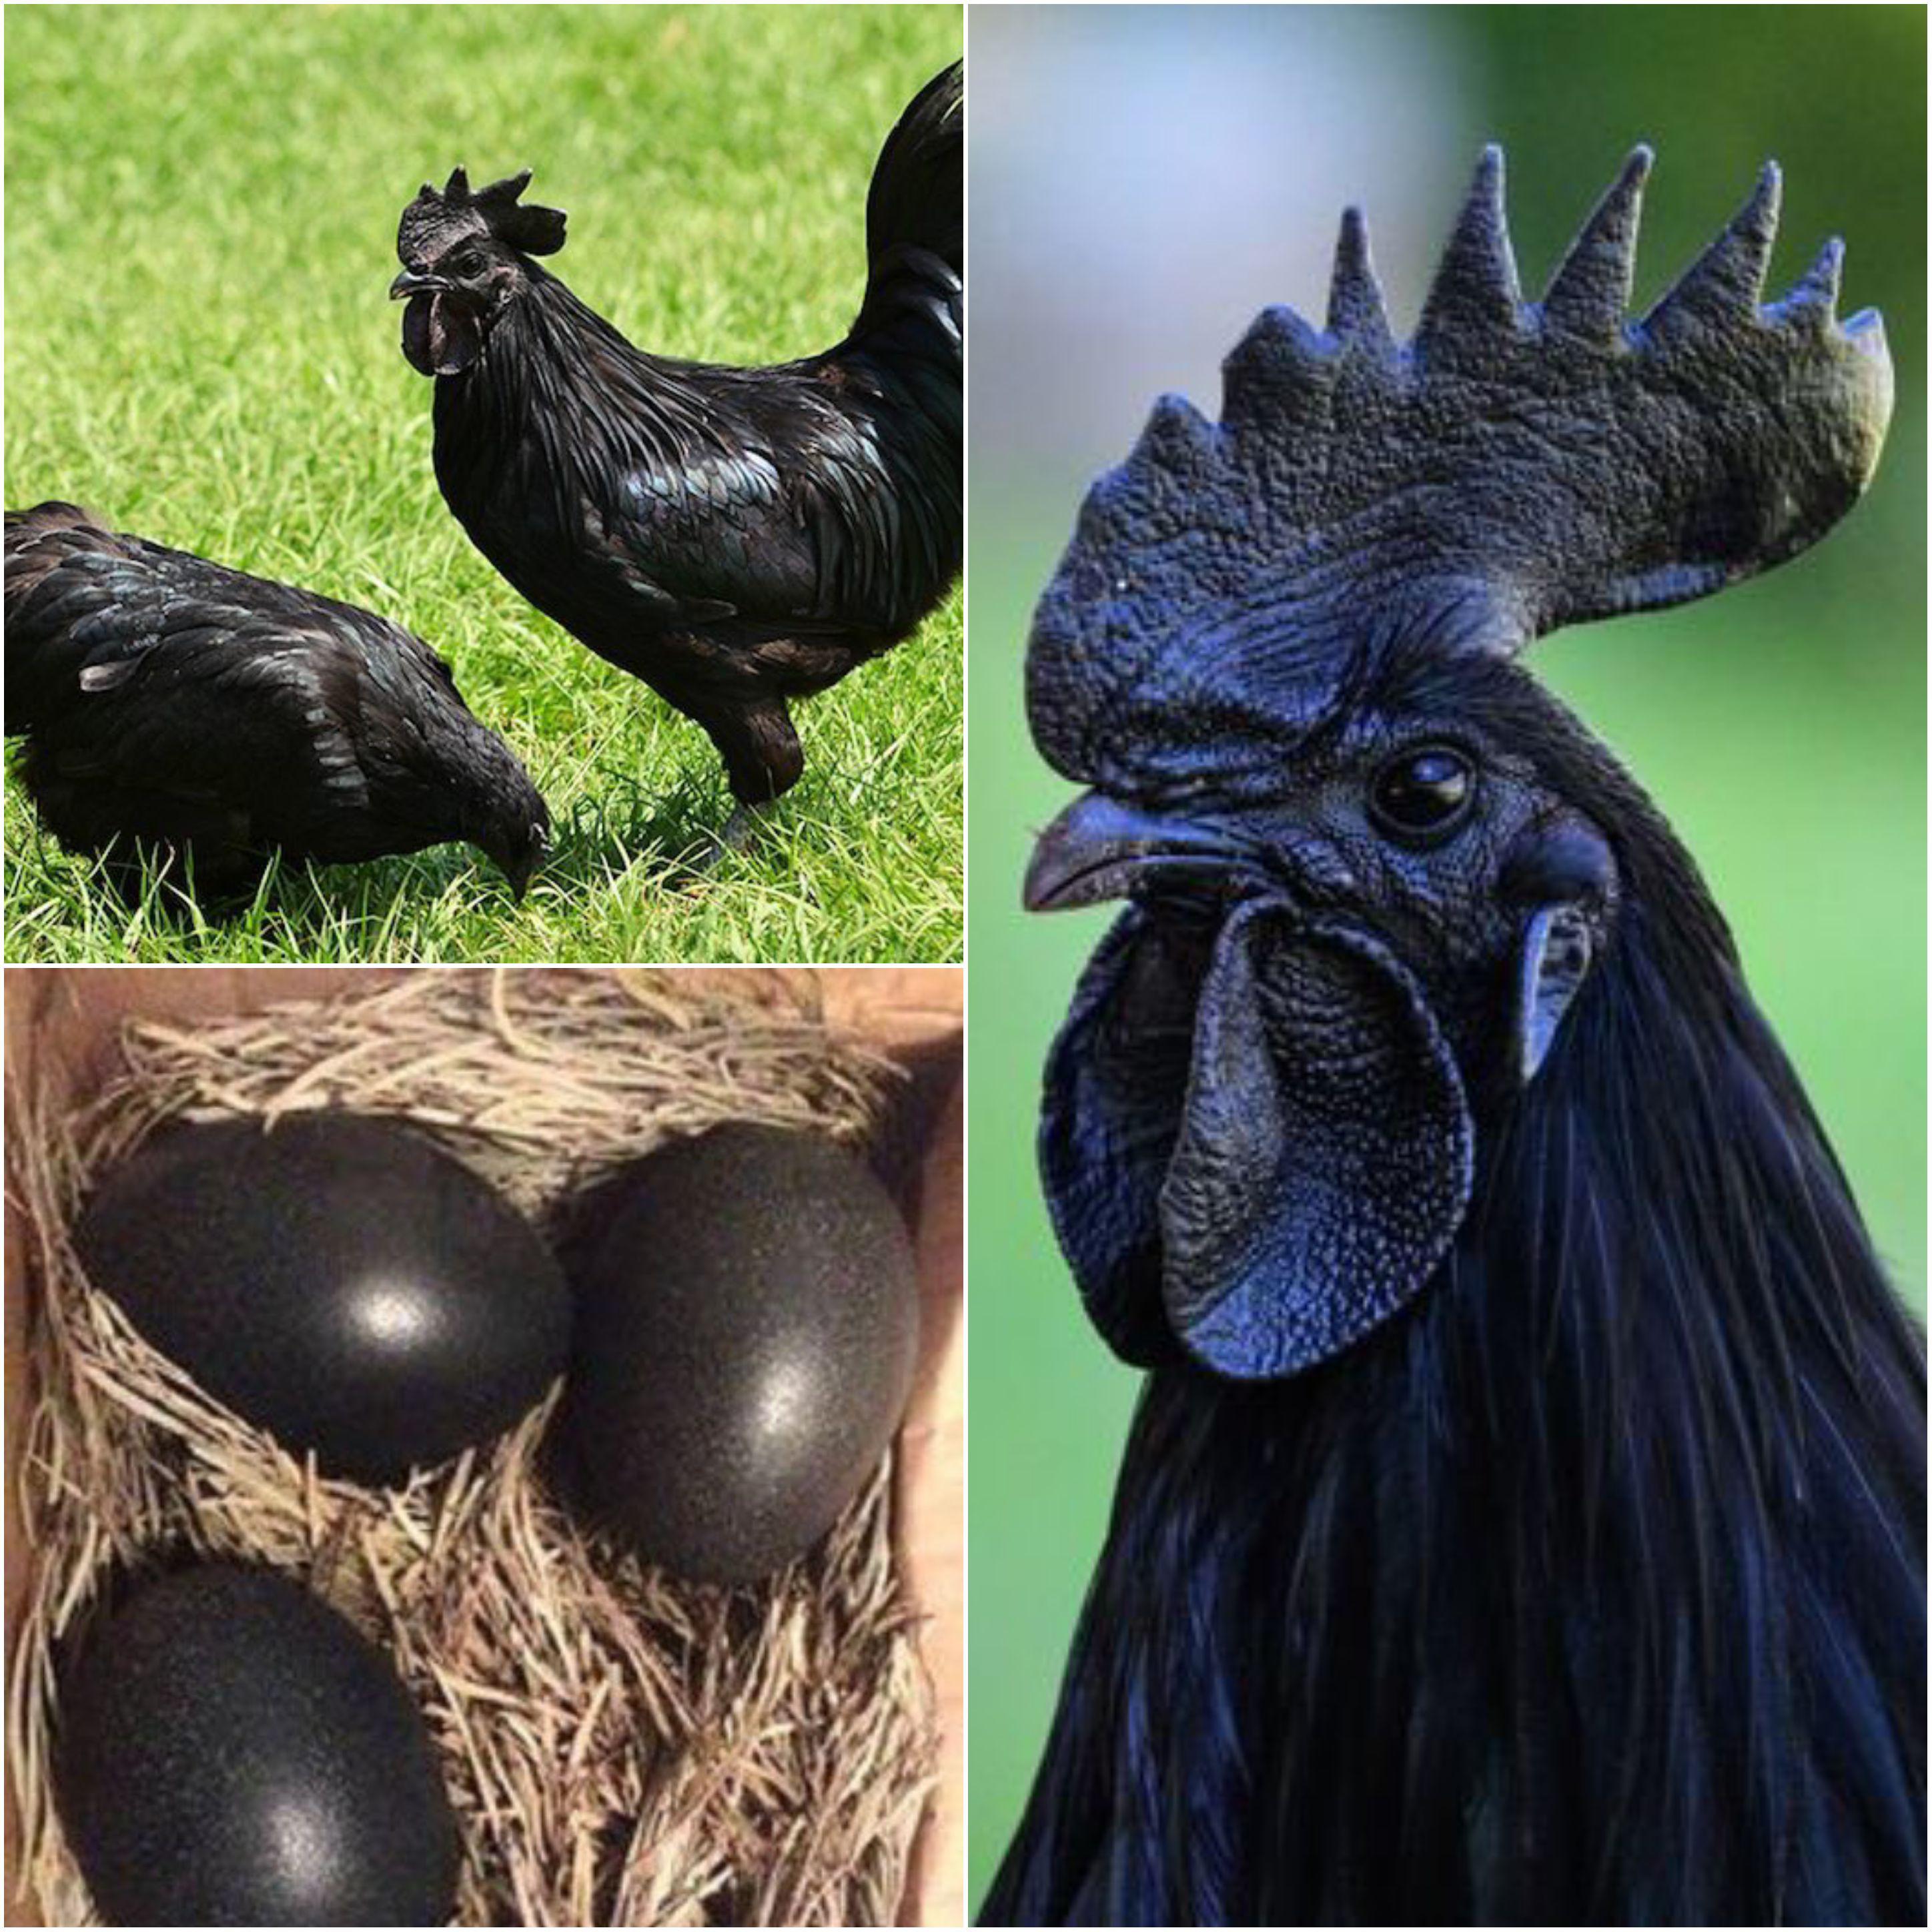 Virtually every physical feature outside and inside the Swedish Black Hen is the deepest black color.  They also taste delicious, allegedly.